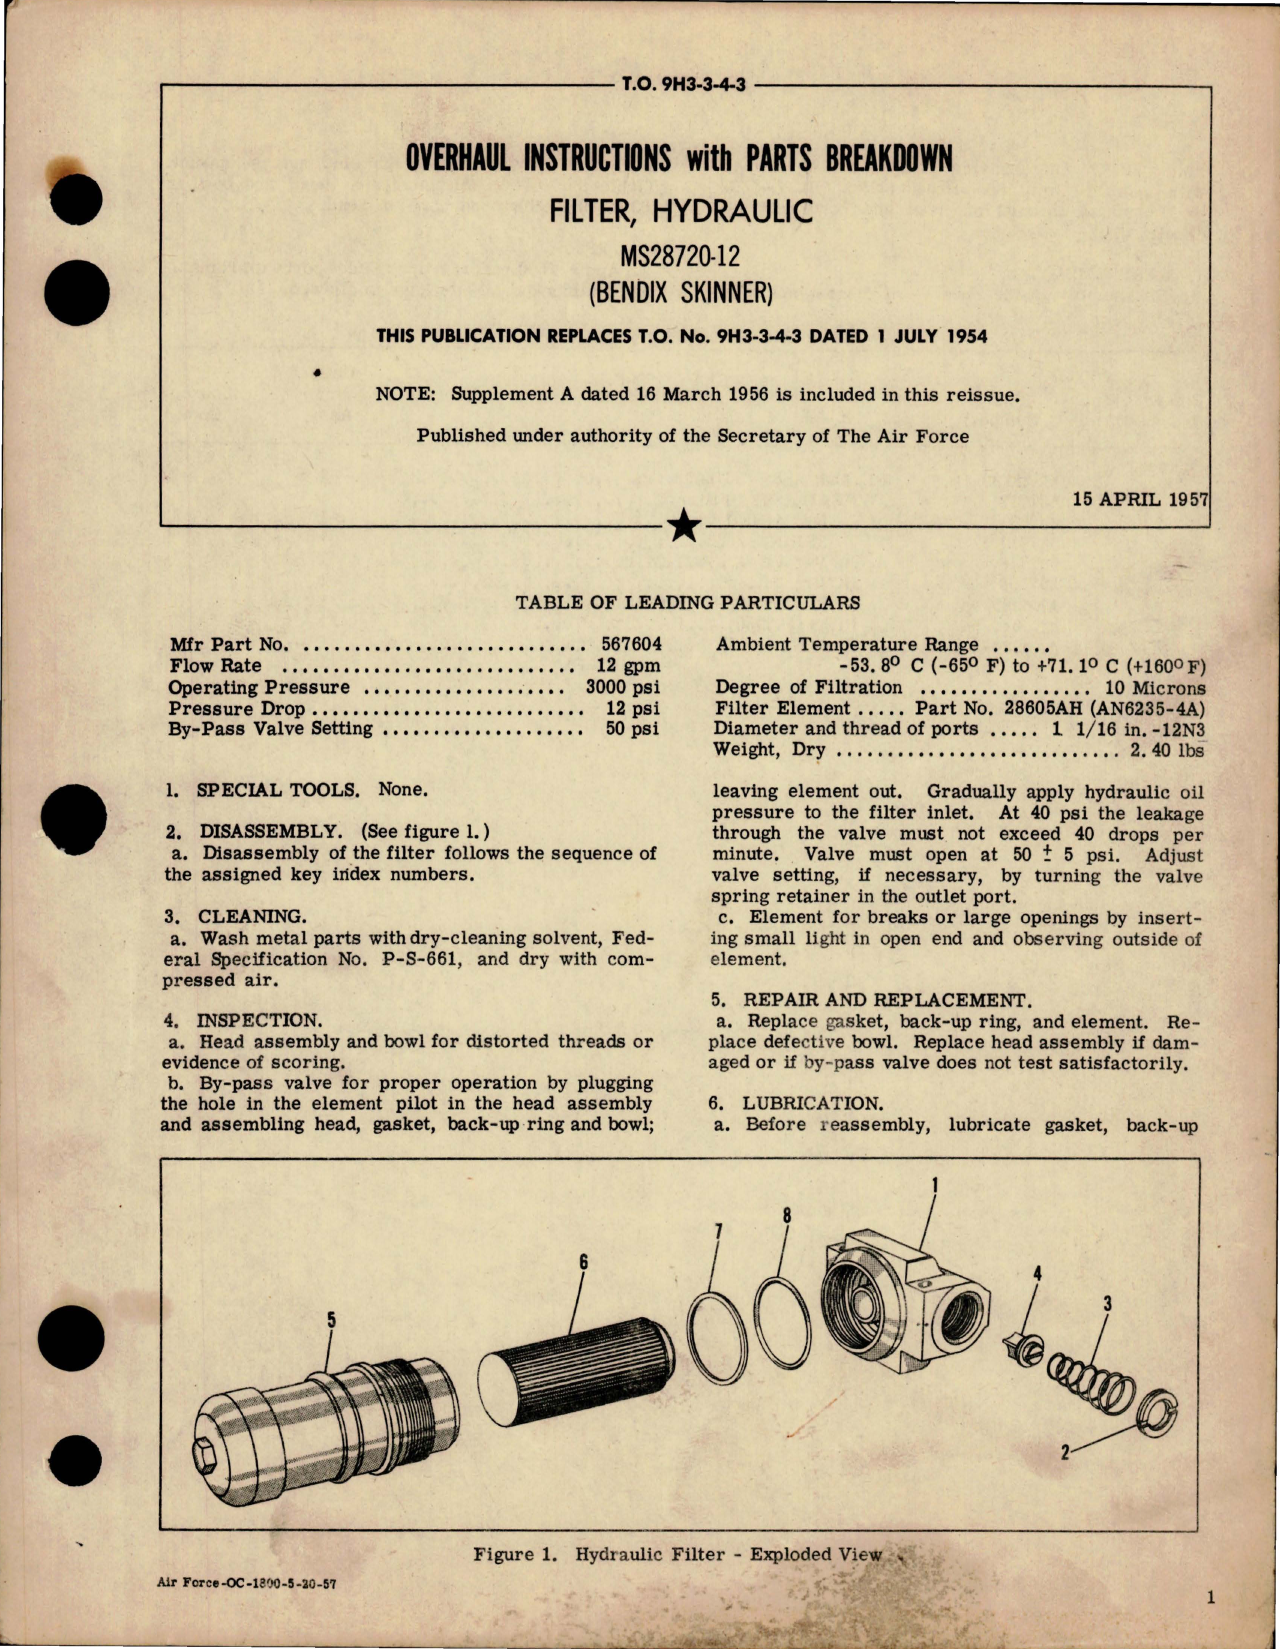 Sample page 1 from AirCorps Library document: Overhaul Instructions with Parts Breakdown for Hydraulic Filter - MS28720-12